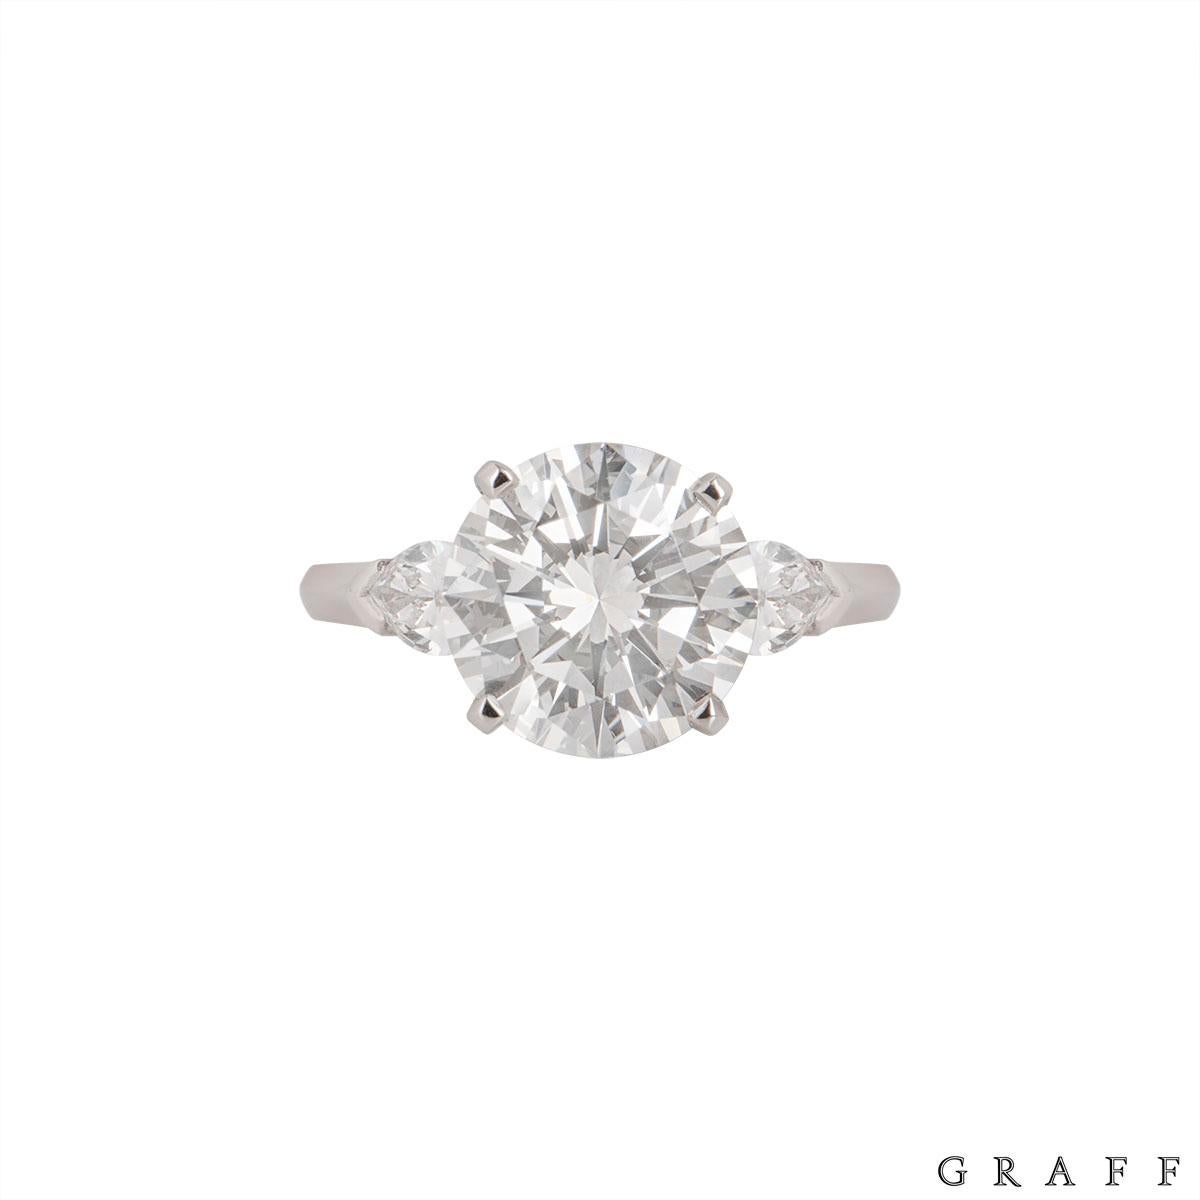 A stunning diamond ring by Graff from the Promise collection. The ring comprises of a round brilliant cut diamond with a single pear shaped diamond on each side in a claw setting. The round brilliant cut diamond has weight of 4.04ct, I colour and